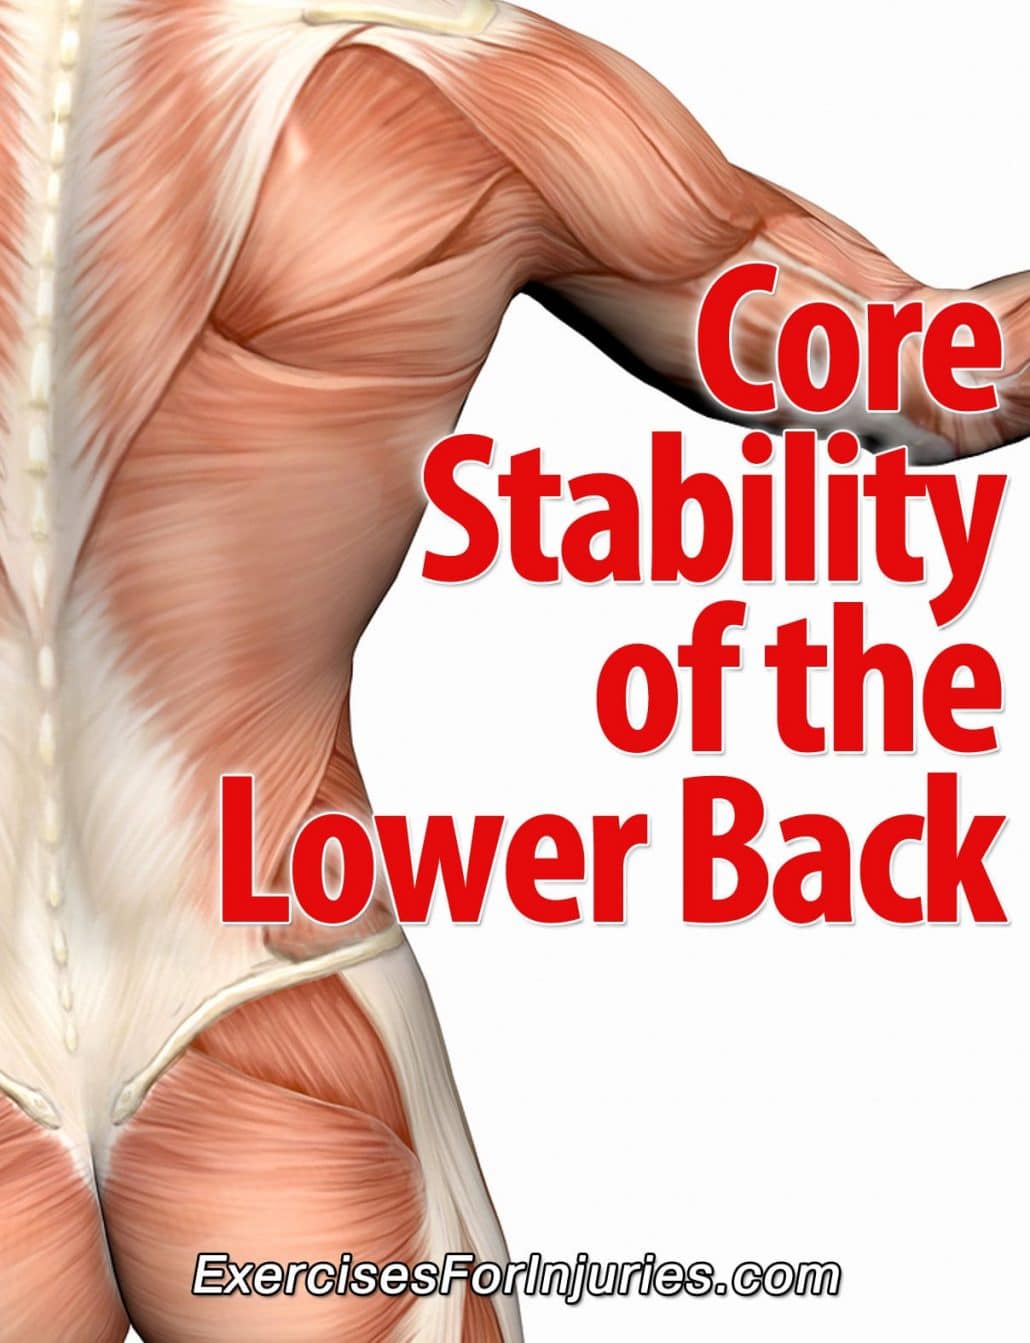 Core Stability of the Lower Back